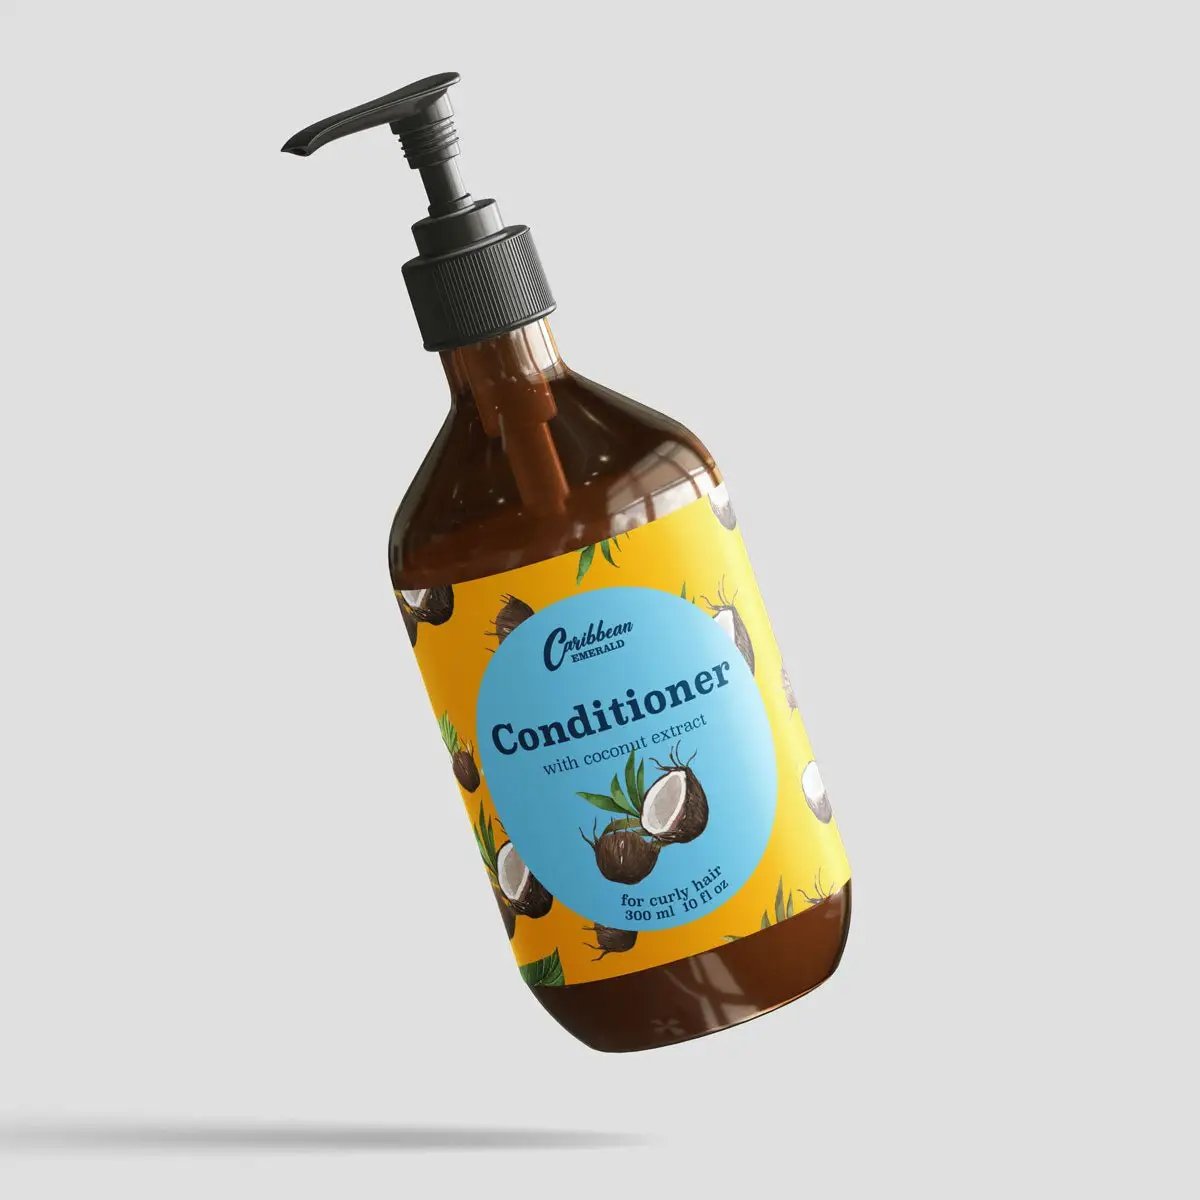 Conditioner with coconut extract